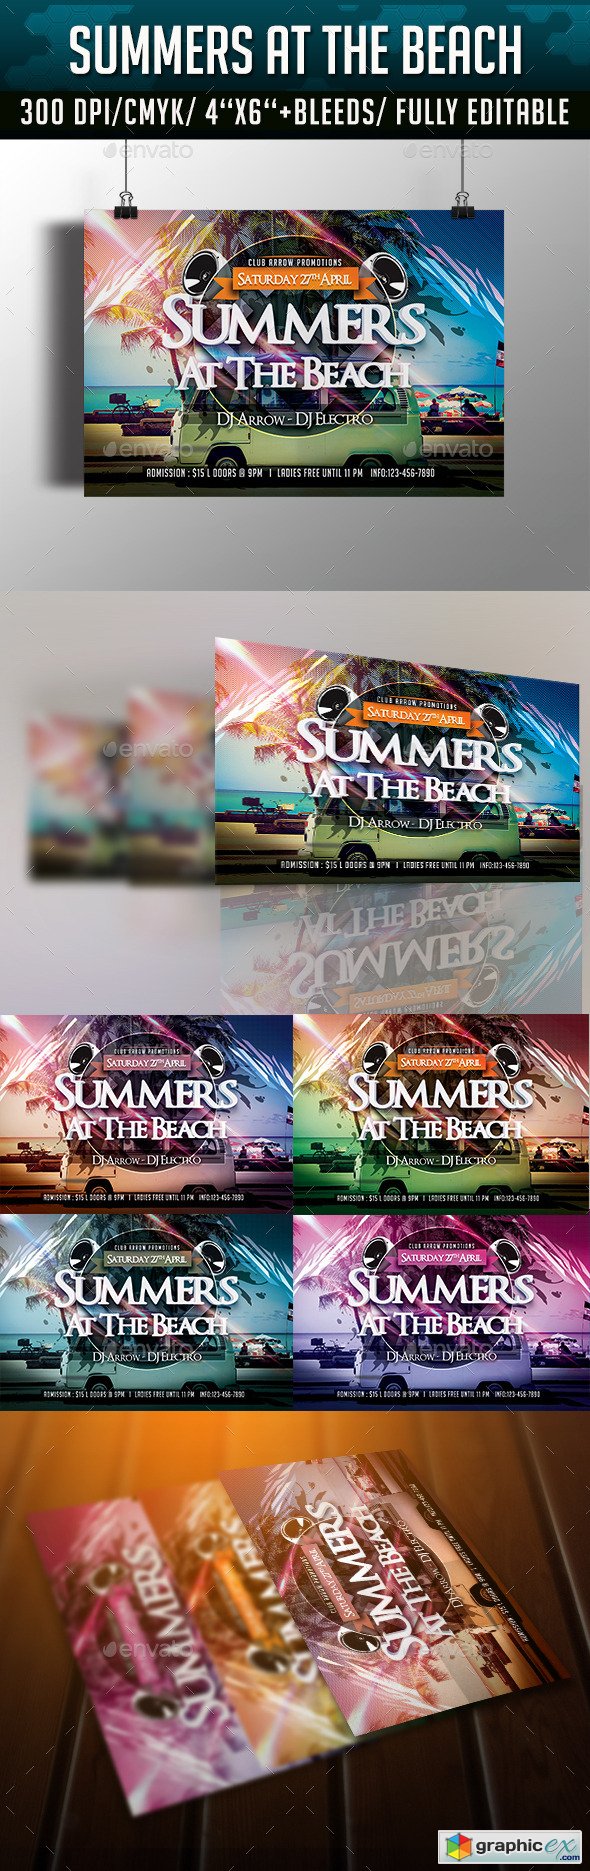 Summers at the Beach Flyer Template